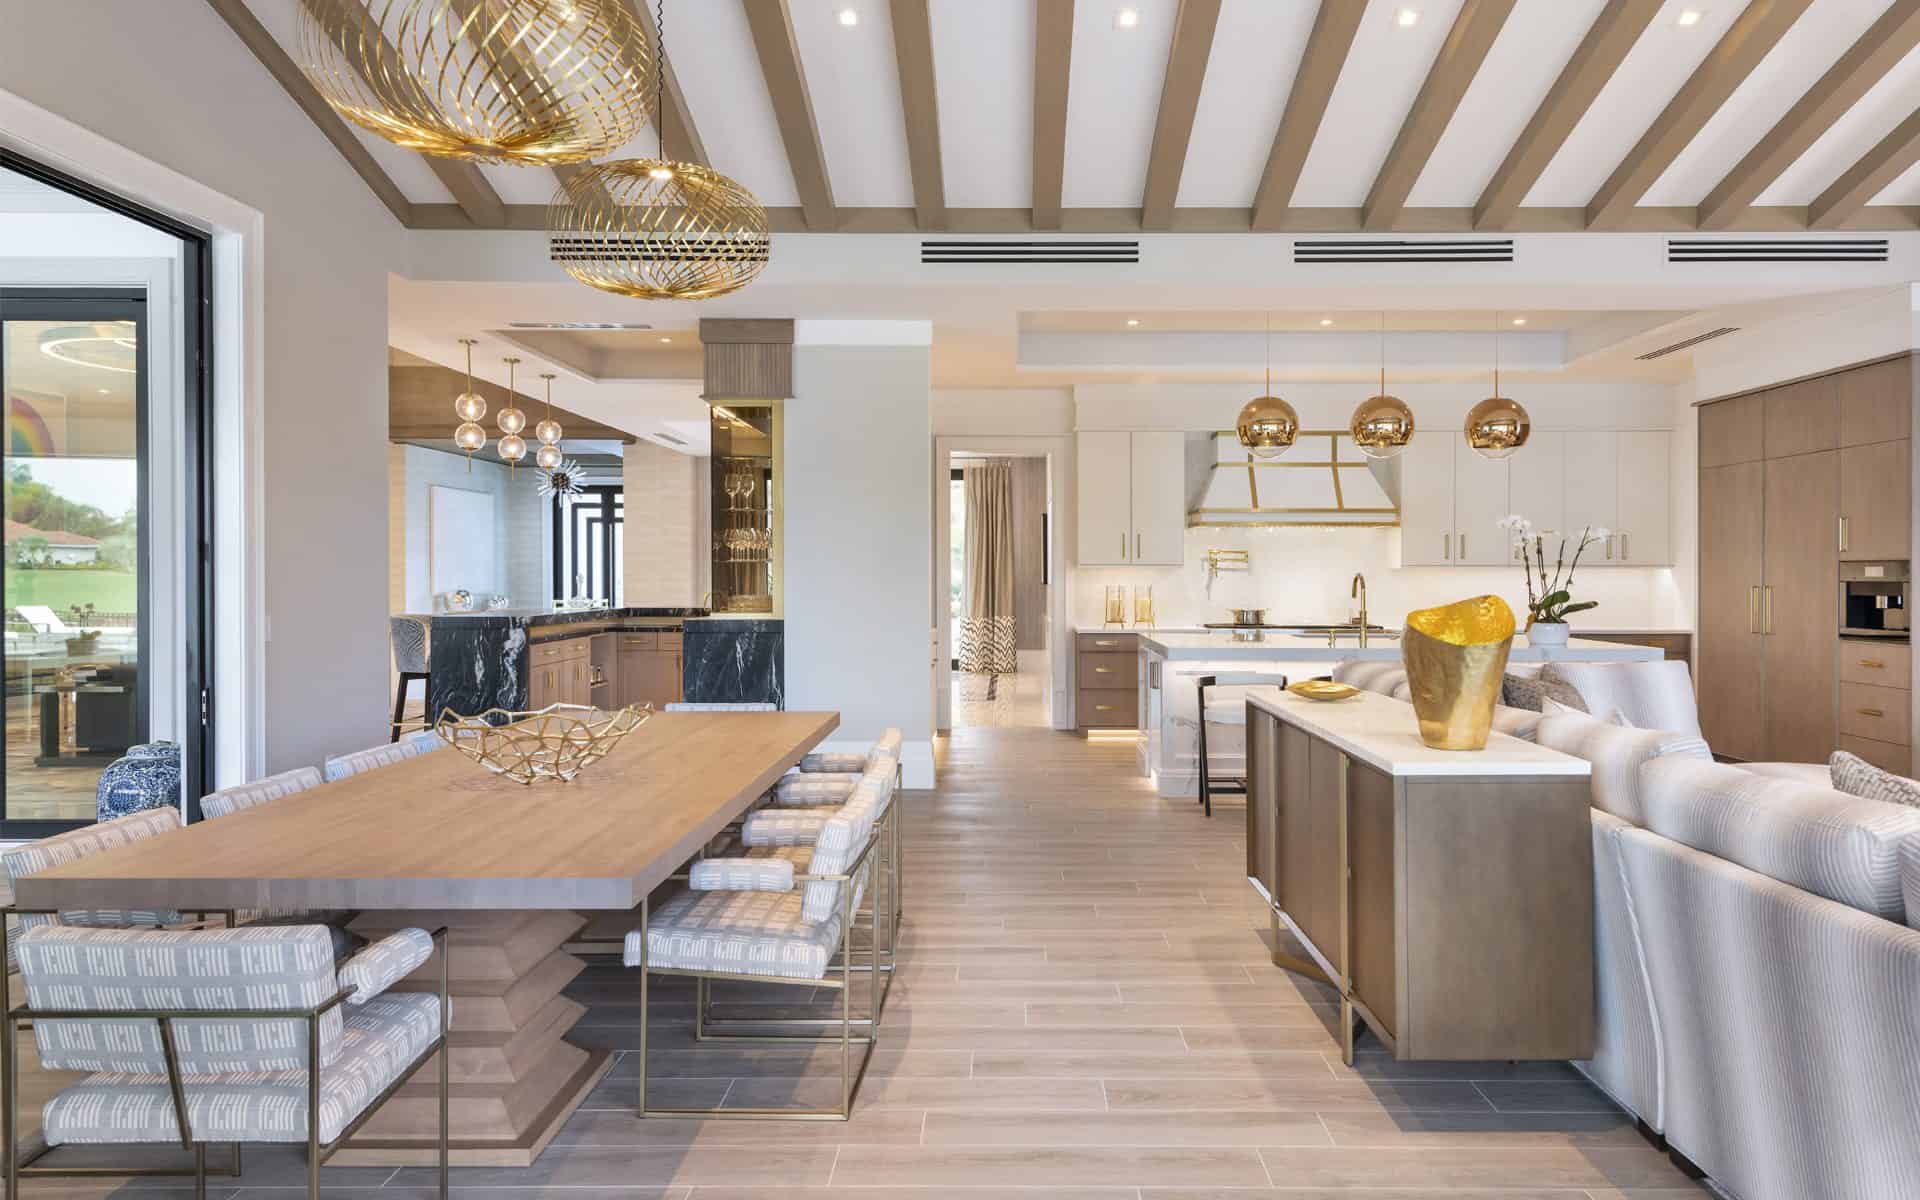 Modern eating area features modern low-profile furniture, contemporary gold accents and white custom kitchen.